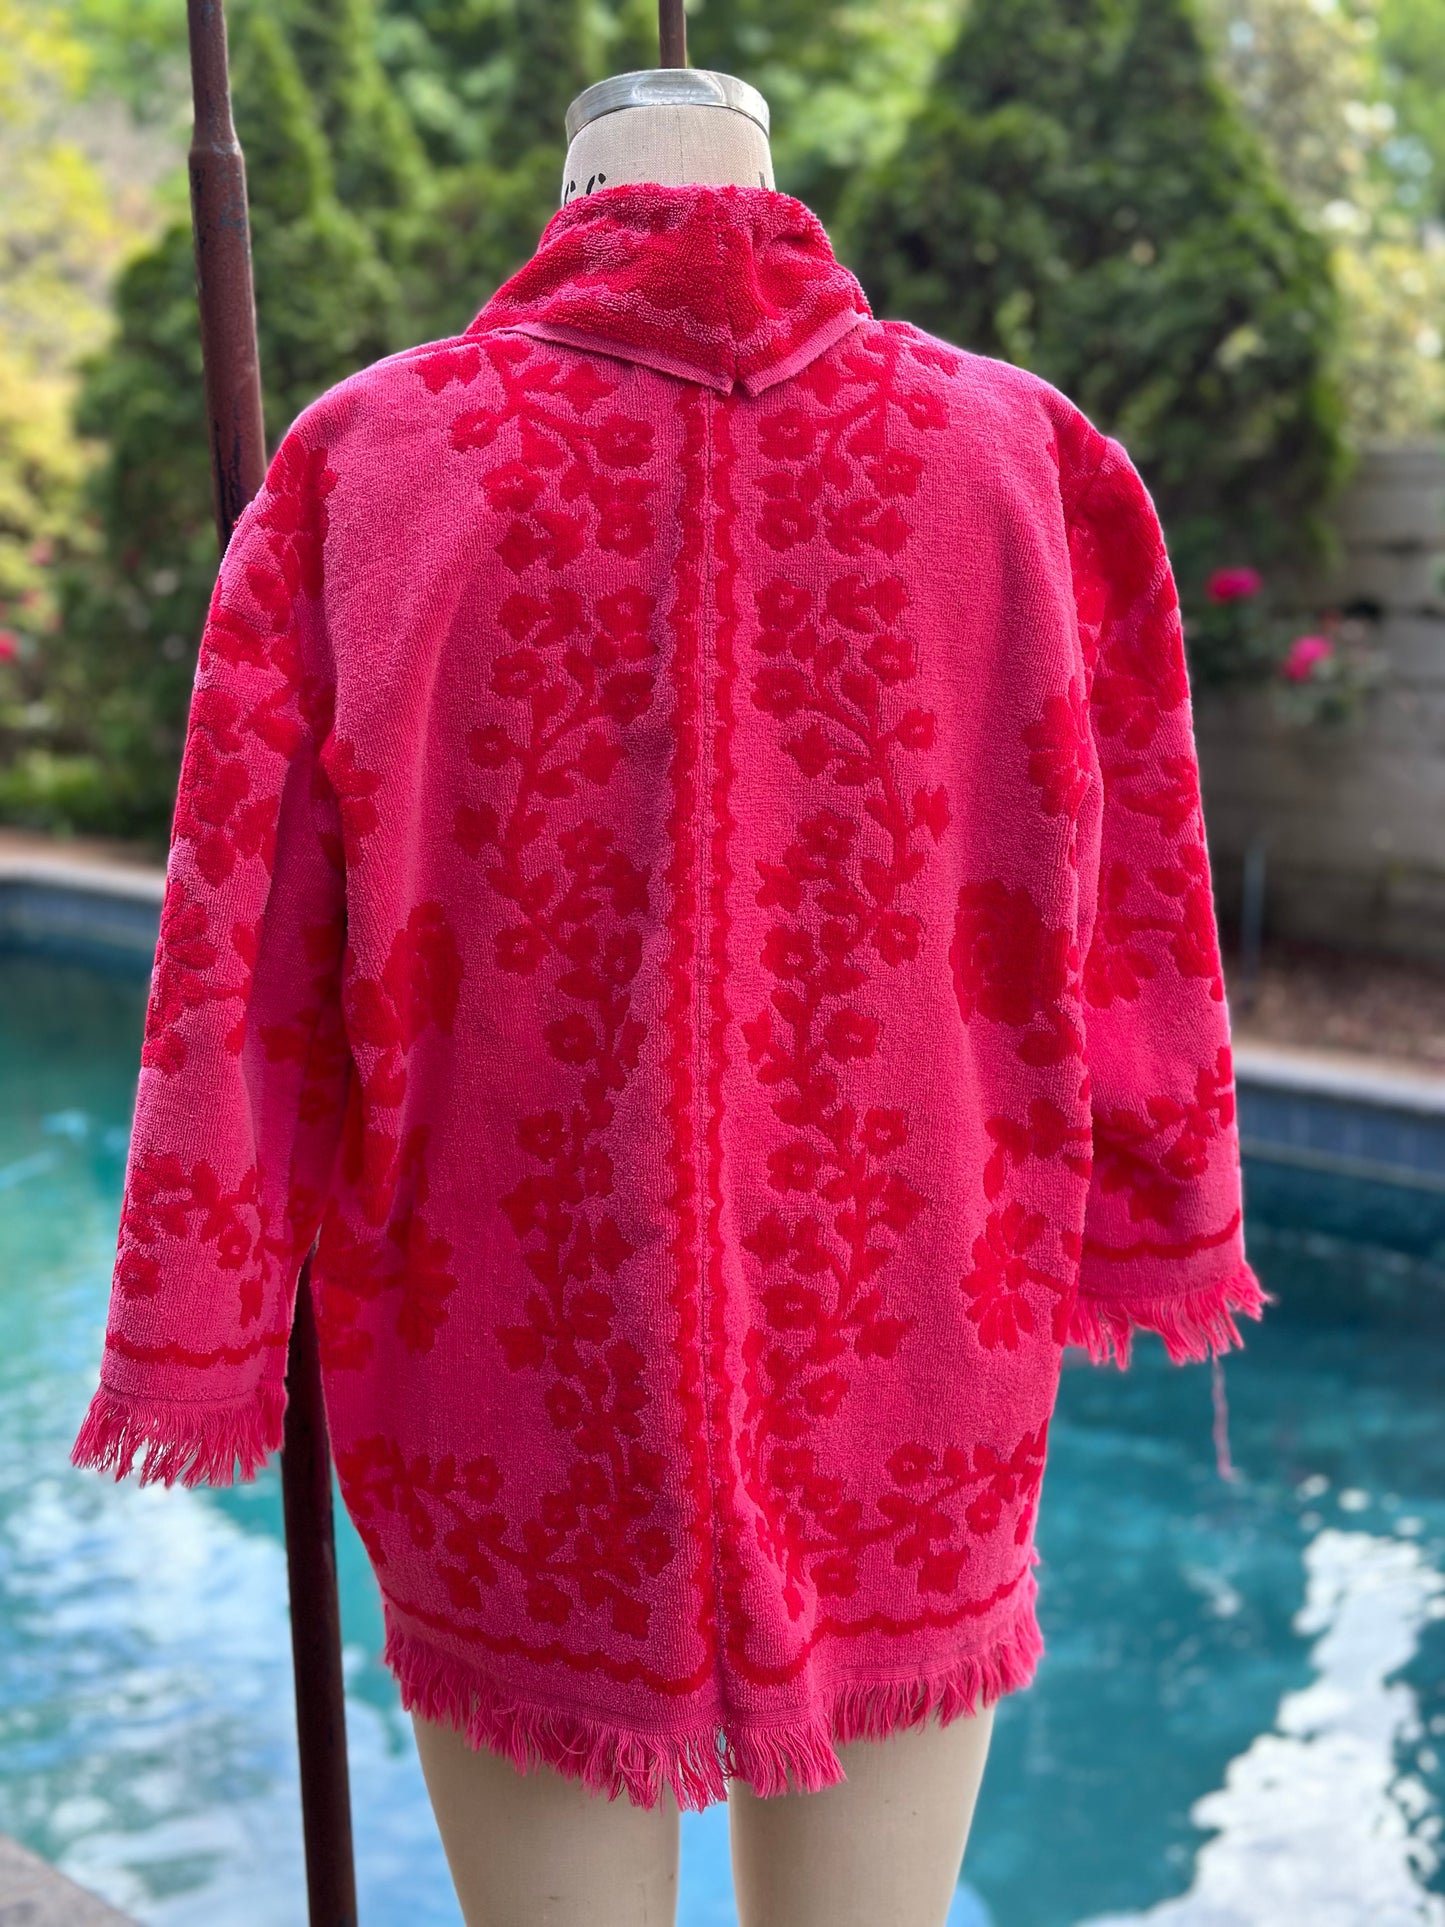 1960s Pink Towel Jacket with Fringe, Beach Cover-Up, Handmade Size M-L